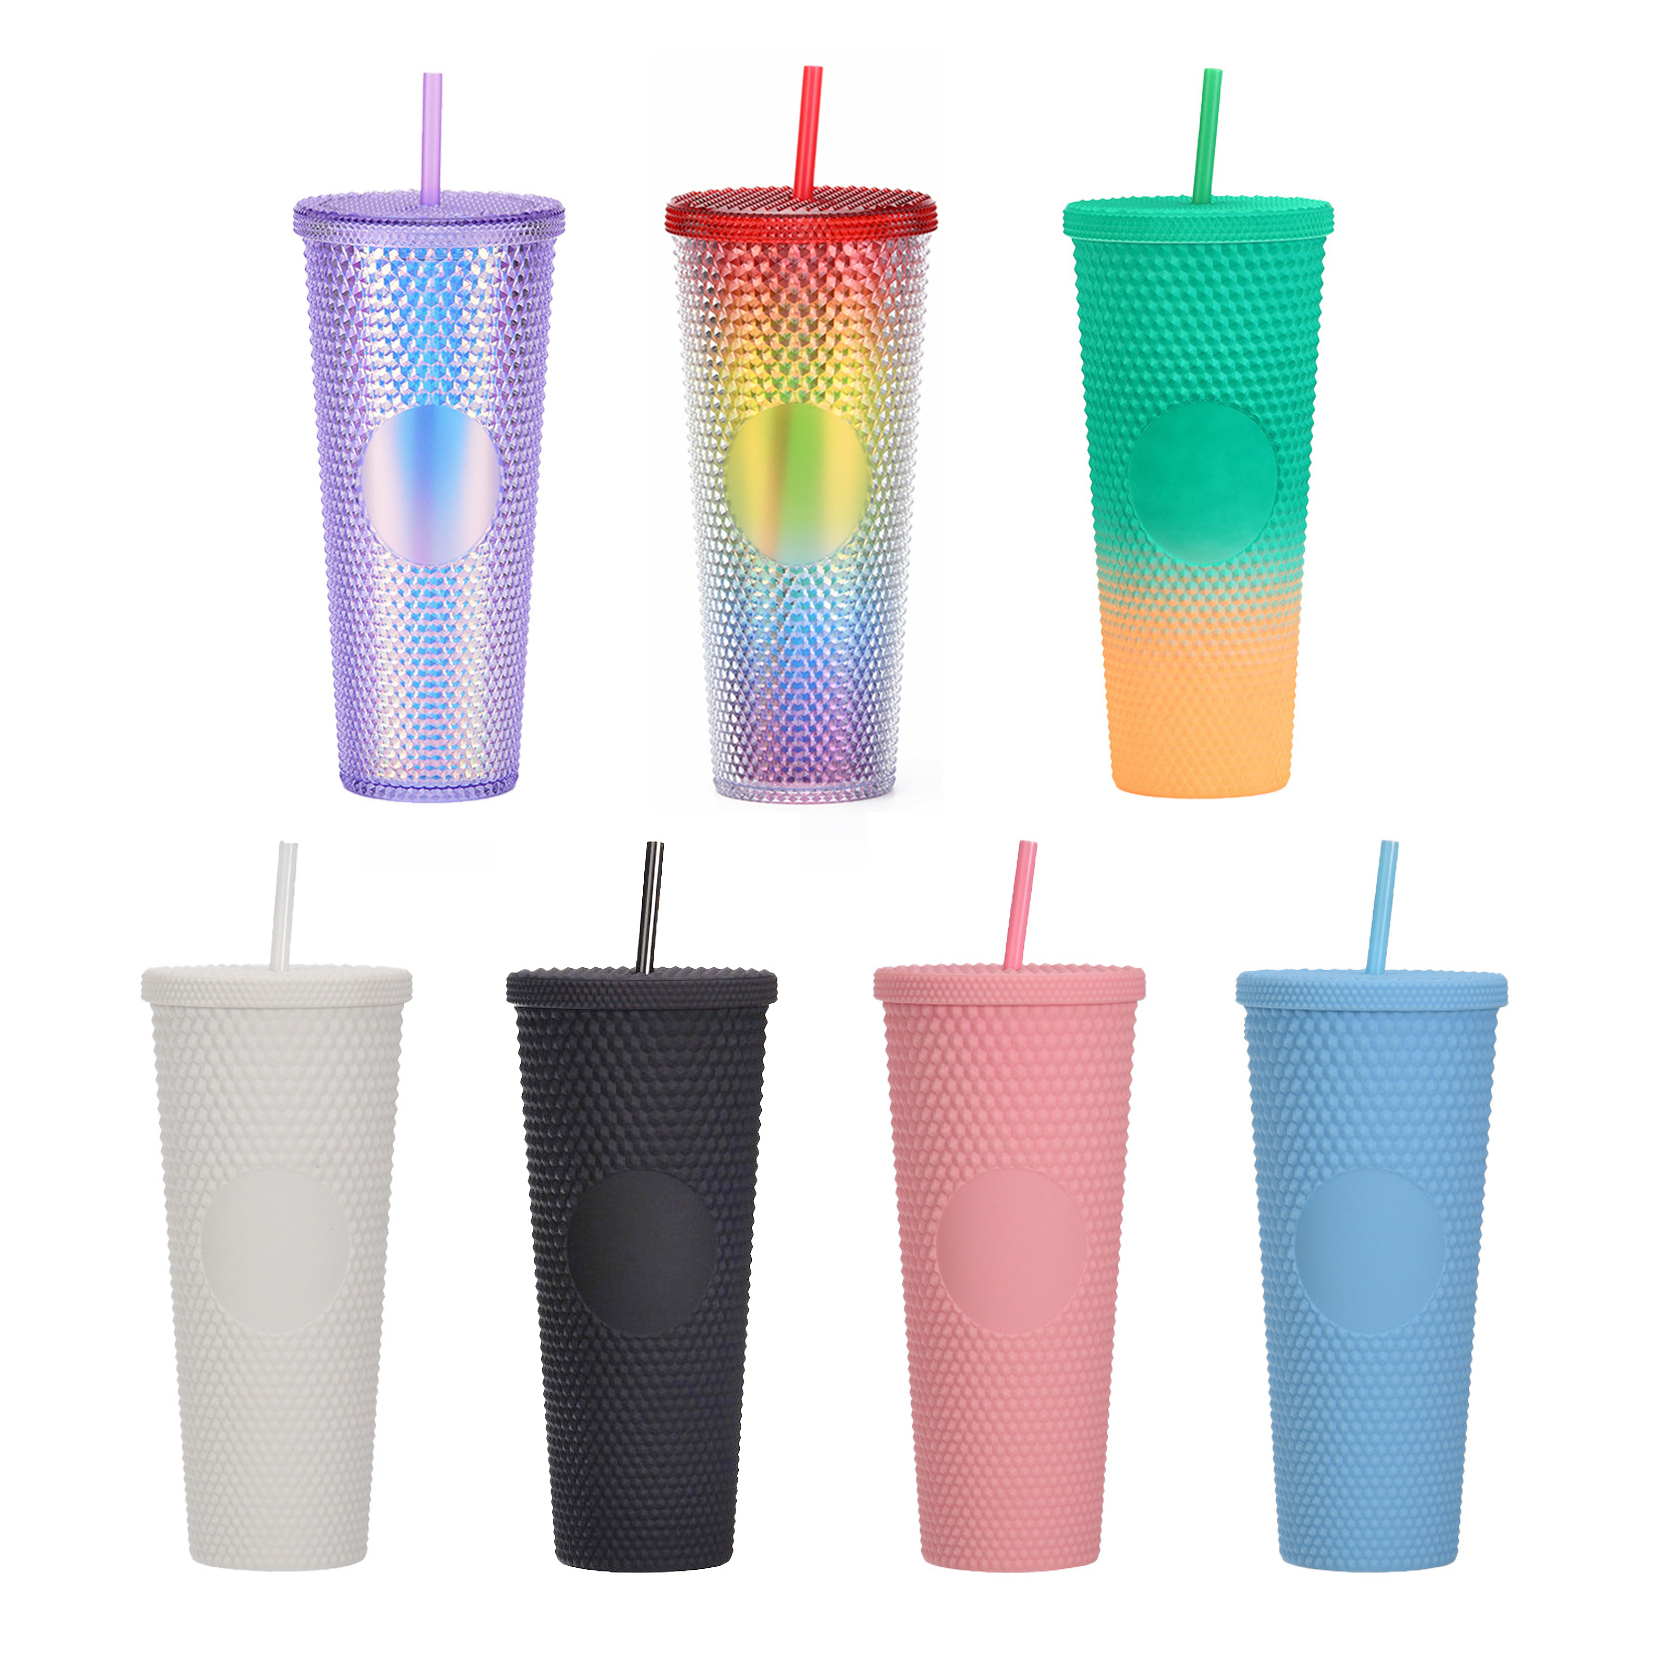 Best Wholesale Tumblers Suppliers in China/US/Australia